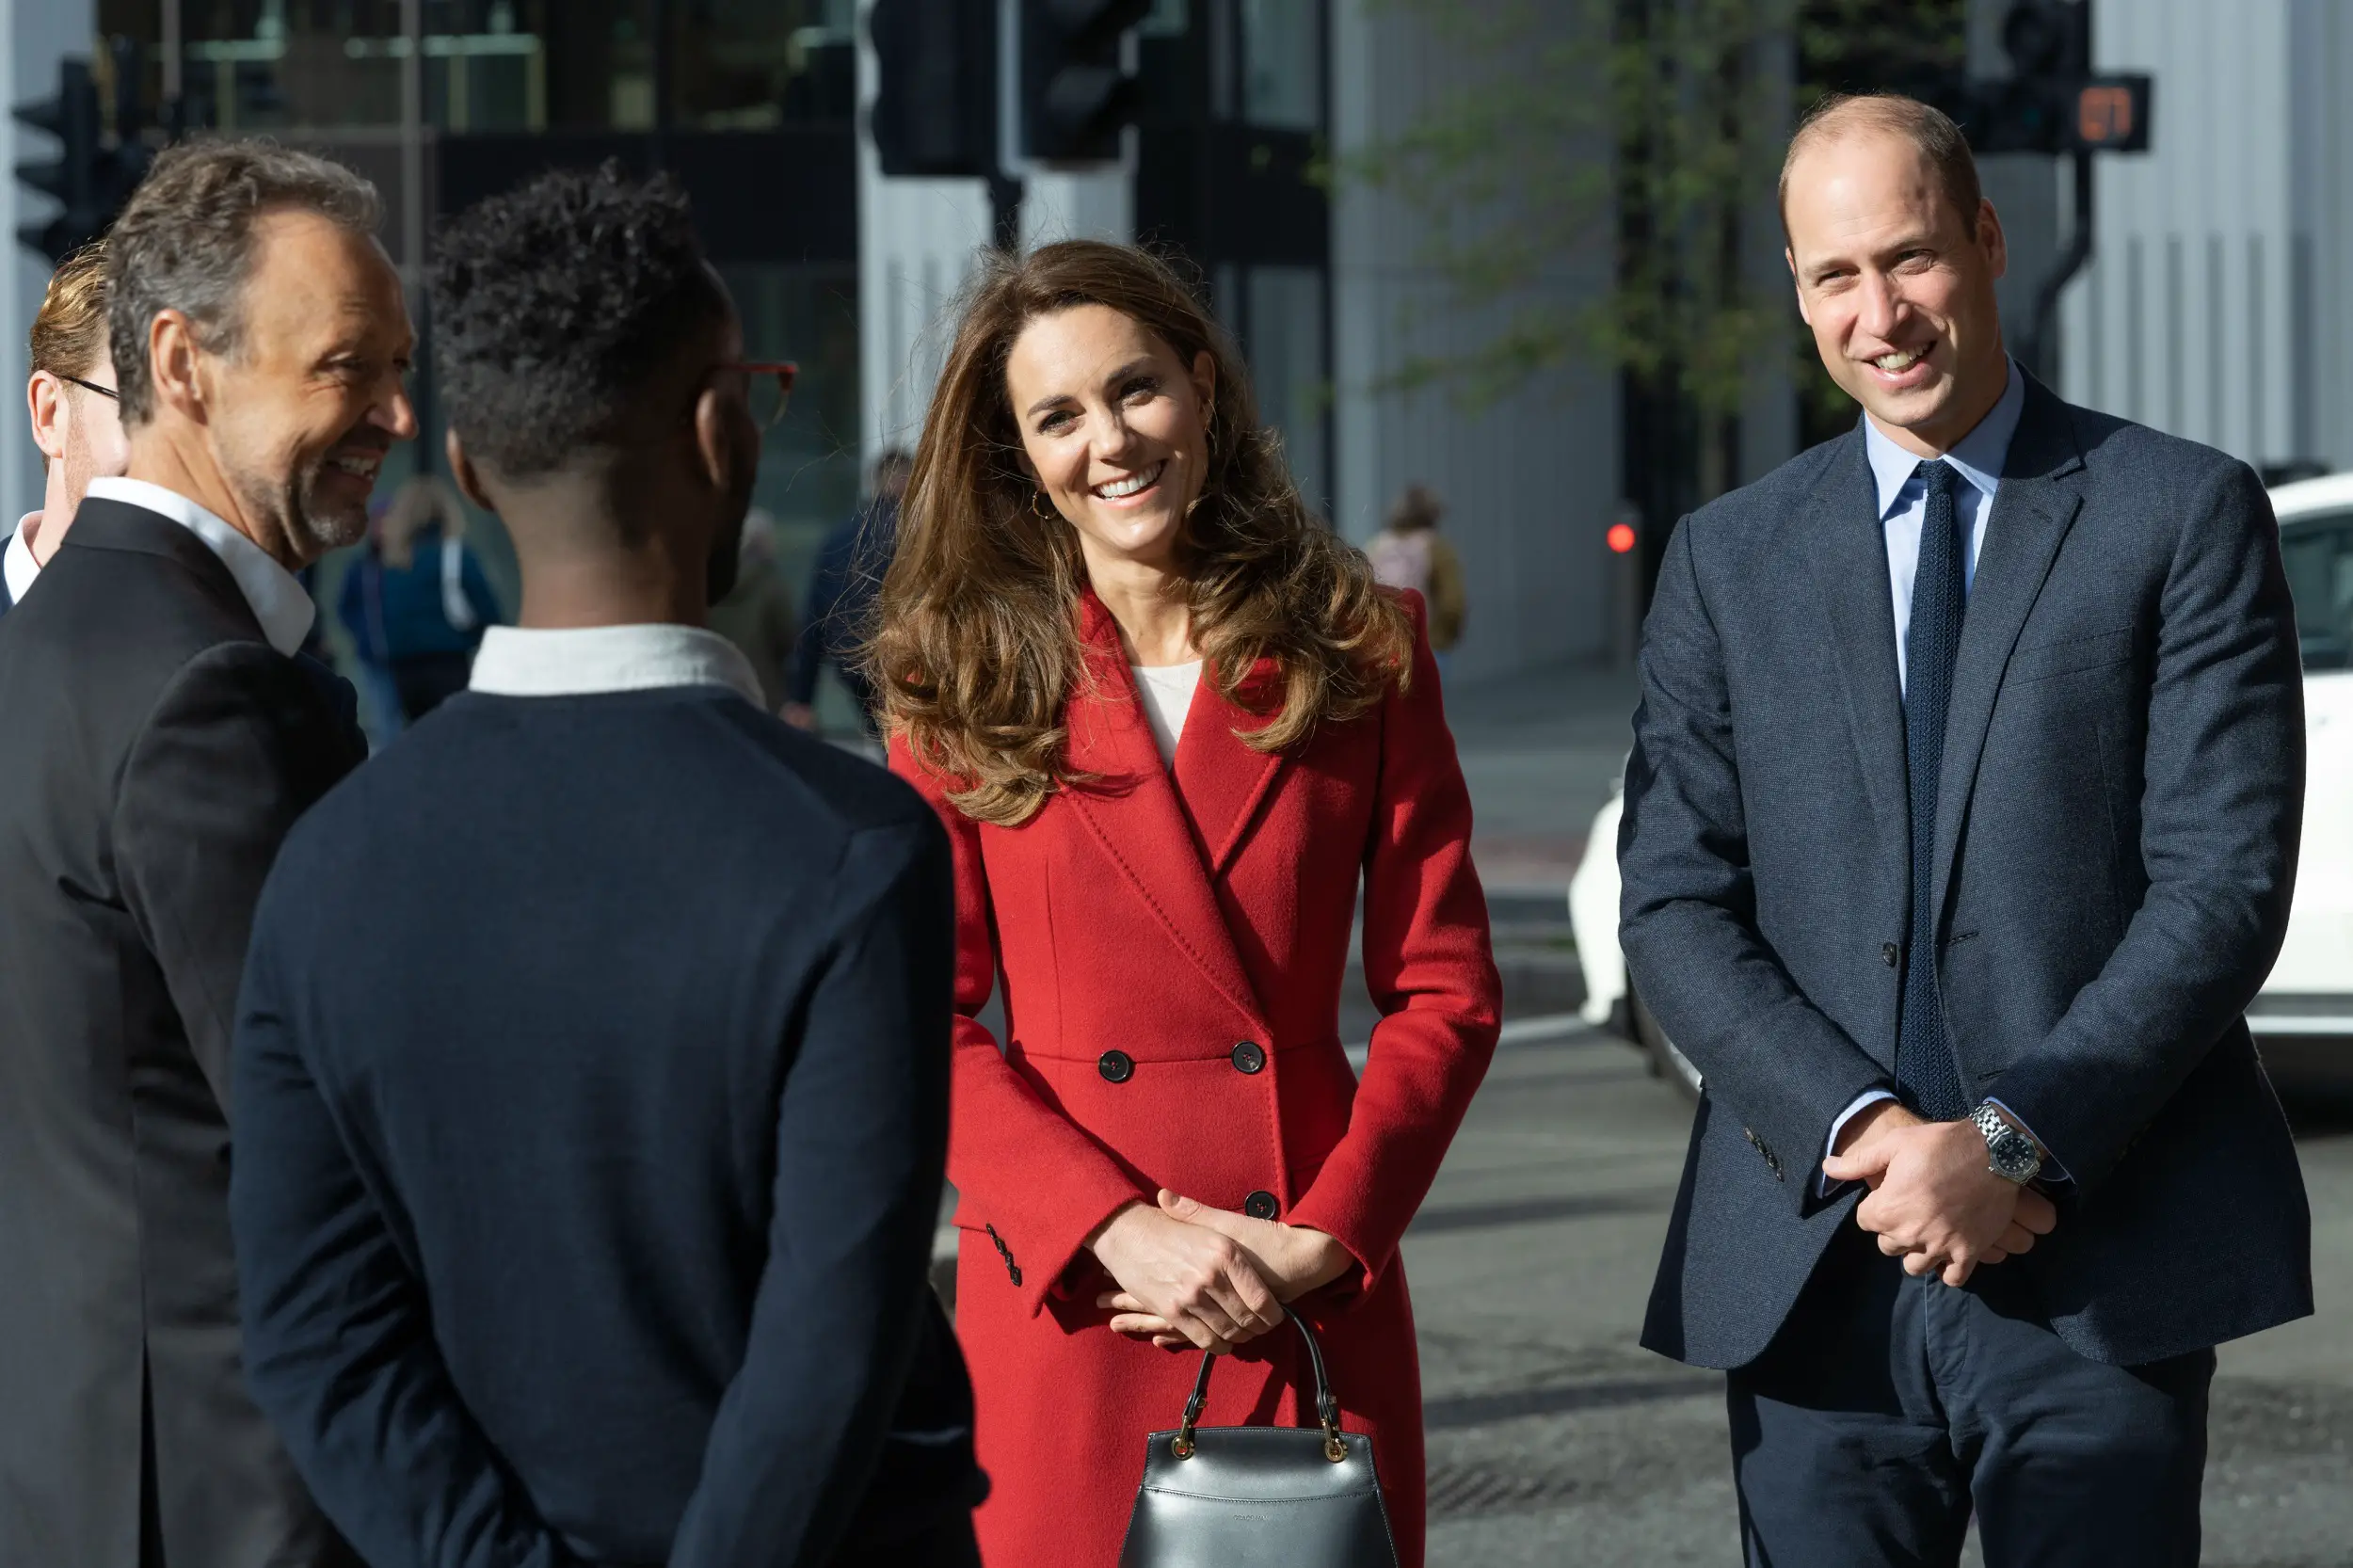 The Duke and Duchess of Cambridge mark the launch of Hold Still 2020 community exhibition